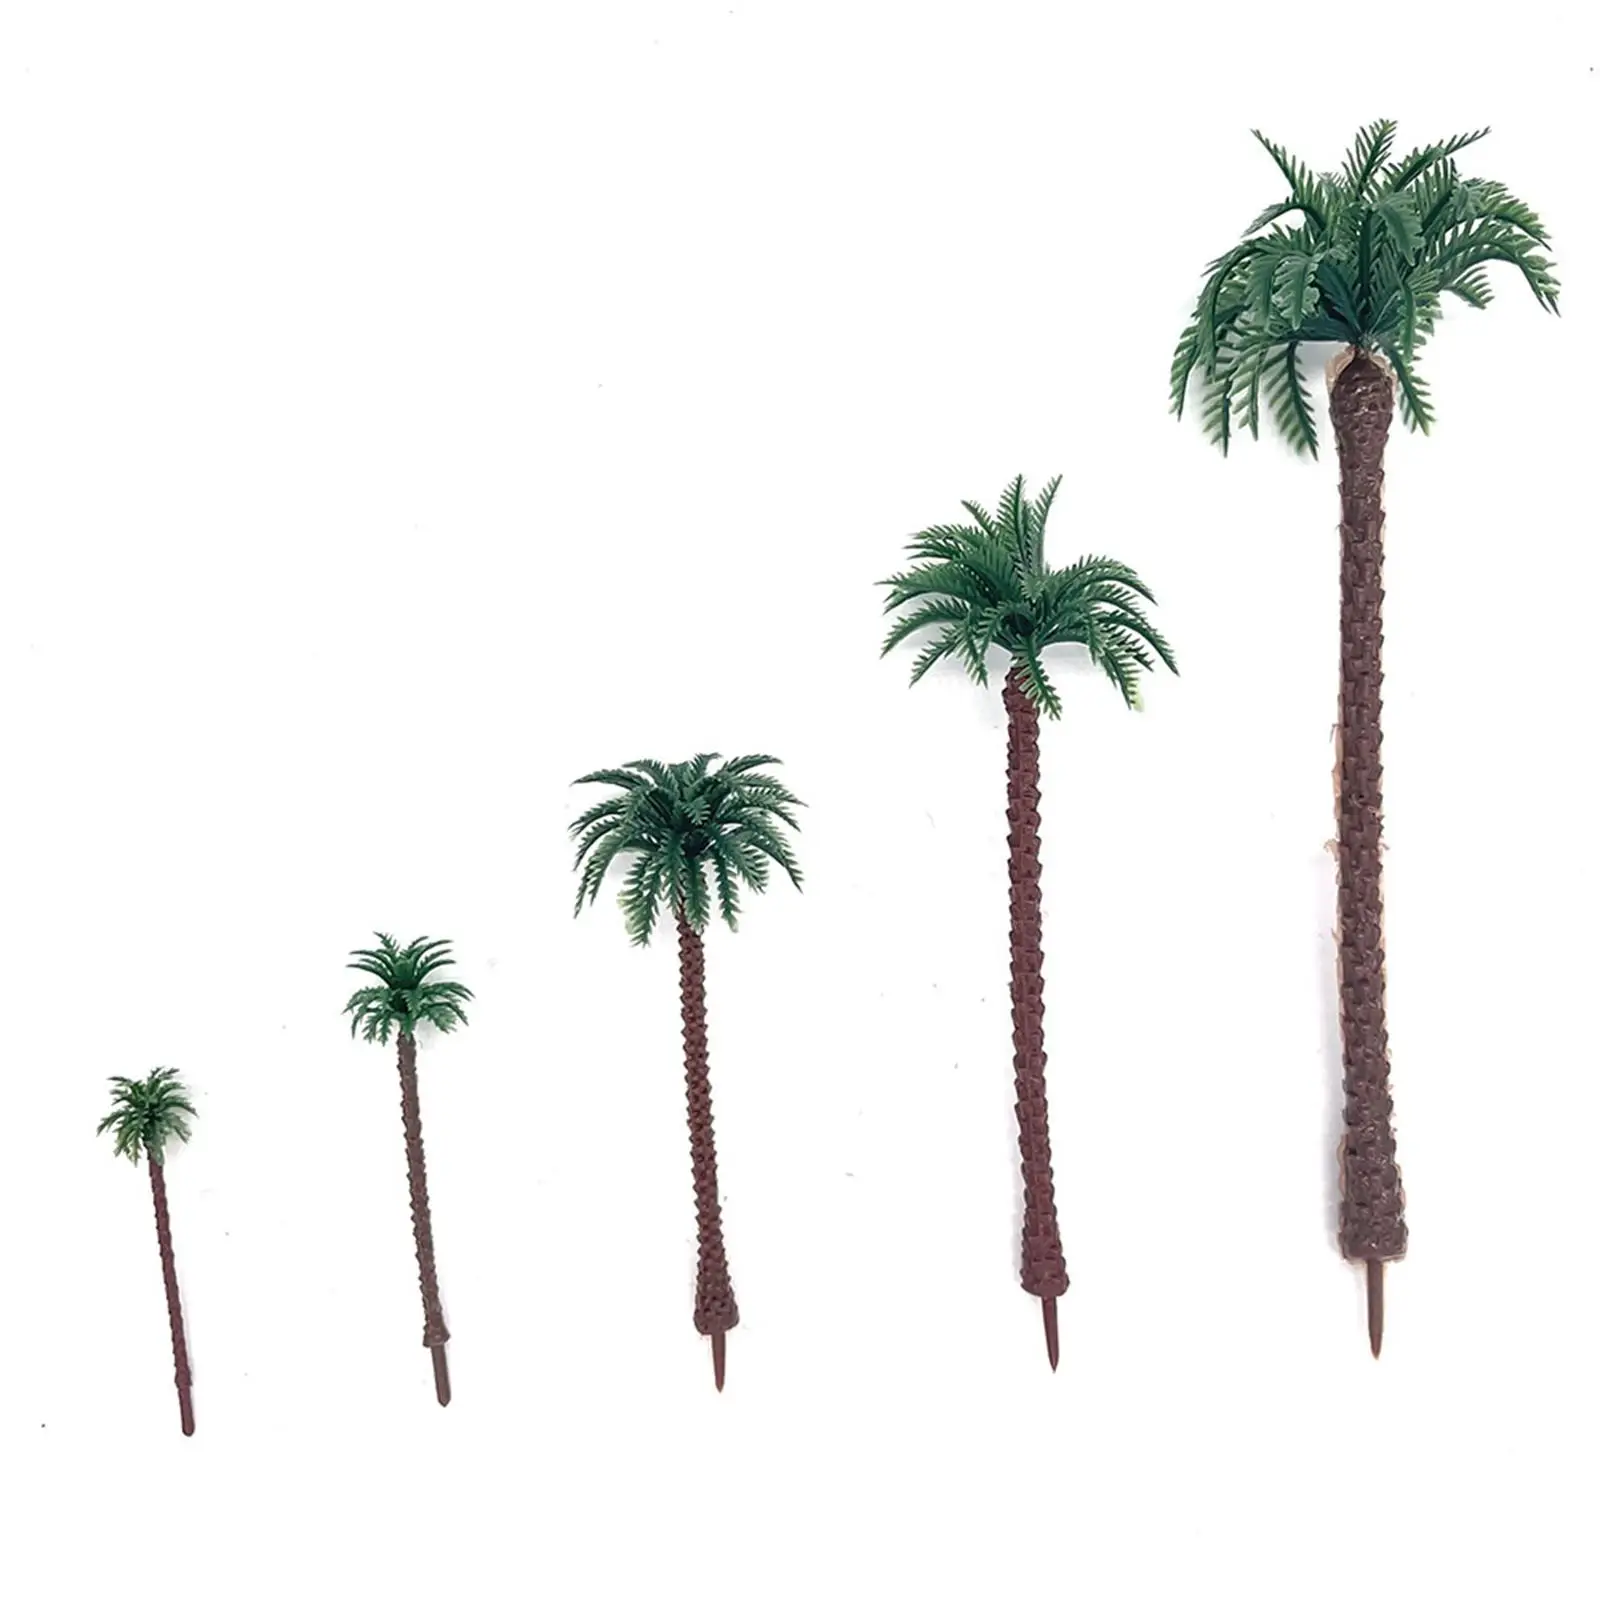 28 Pieces Model Train Scenery Trees 5-19cm Decorative Artificial Plants for Layout Arts Crafts Landscape Street Photo Props